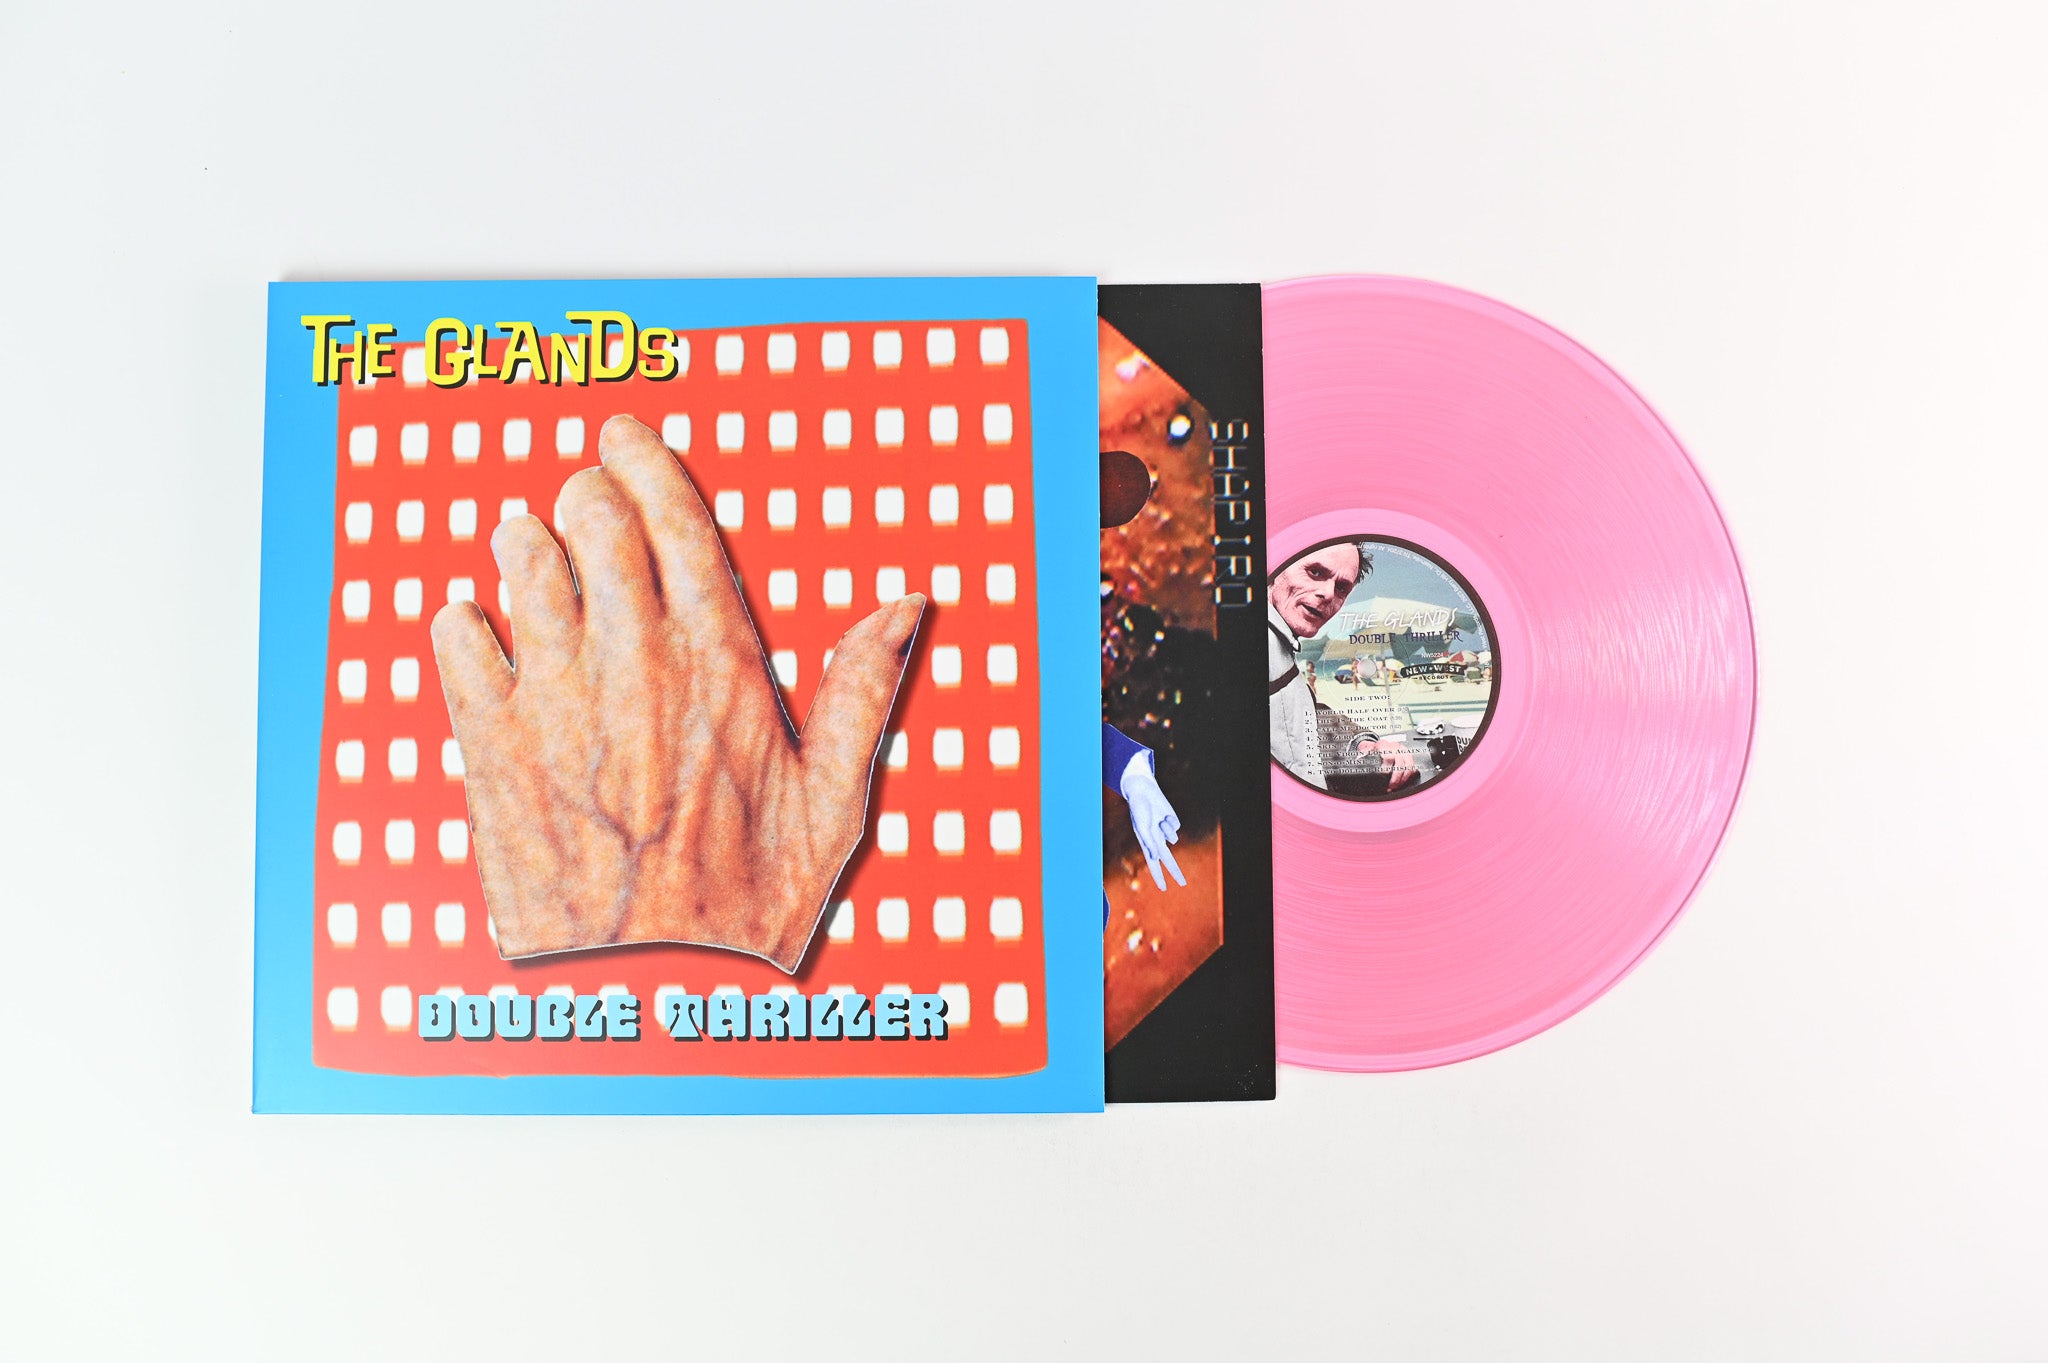 The Glands - I Can See My House From Here on New West Limited Colored Vinyl Box Set